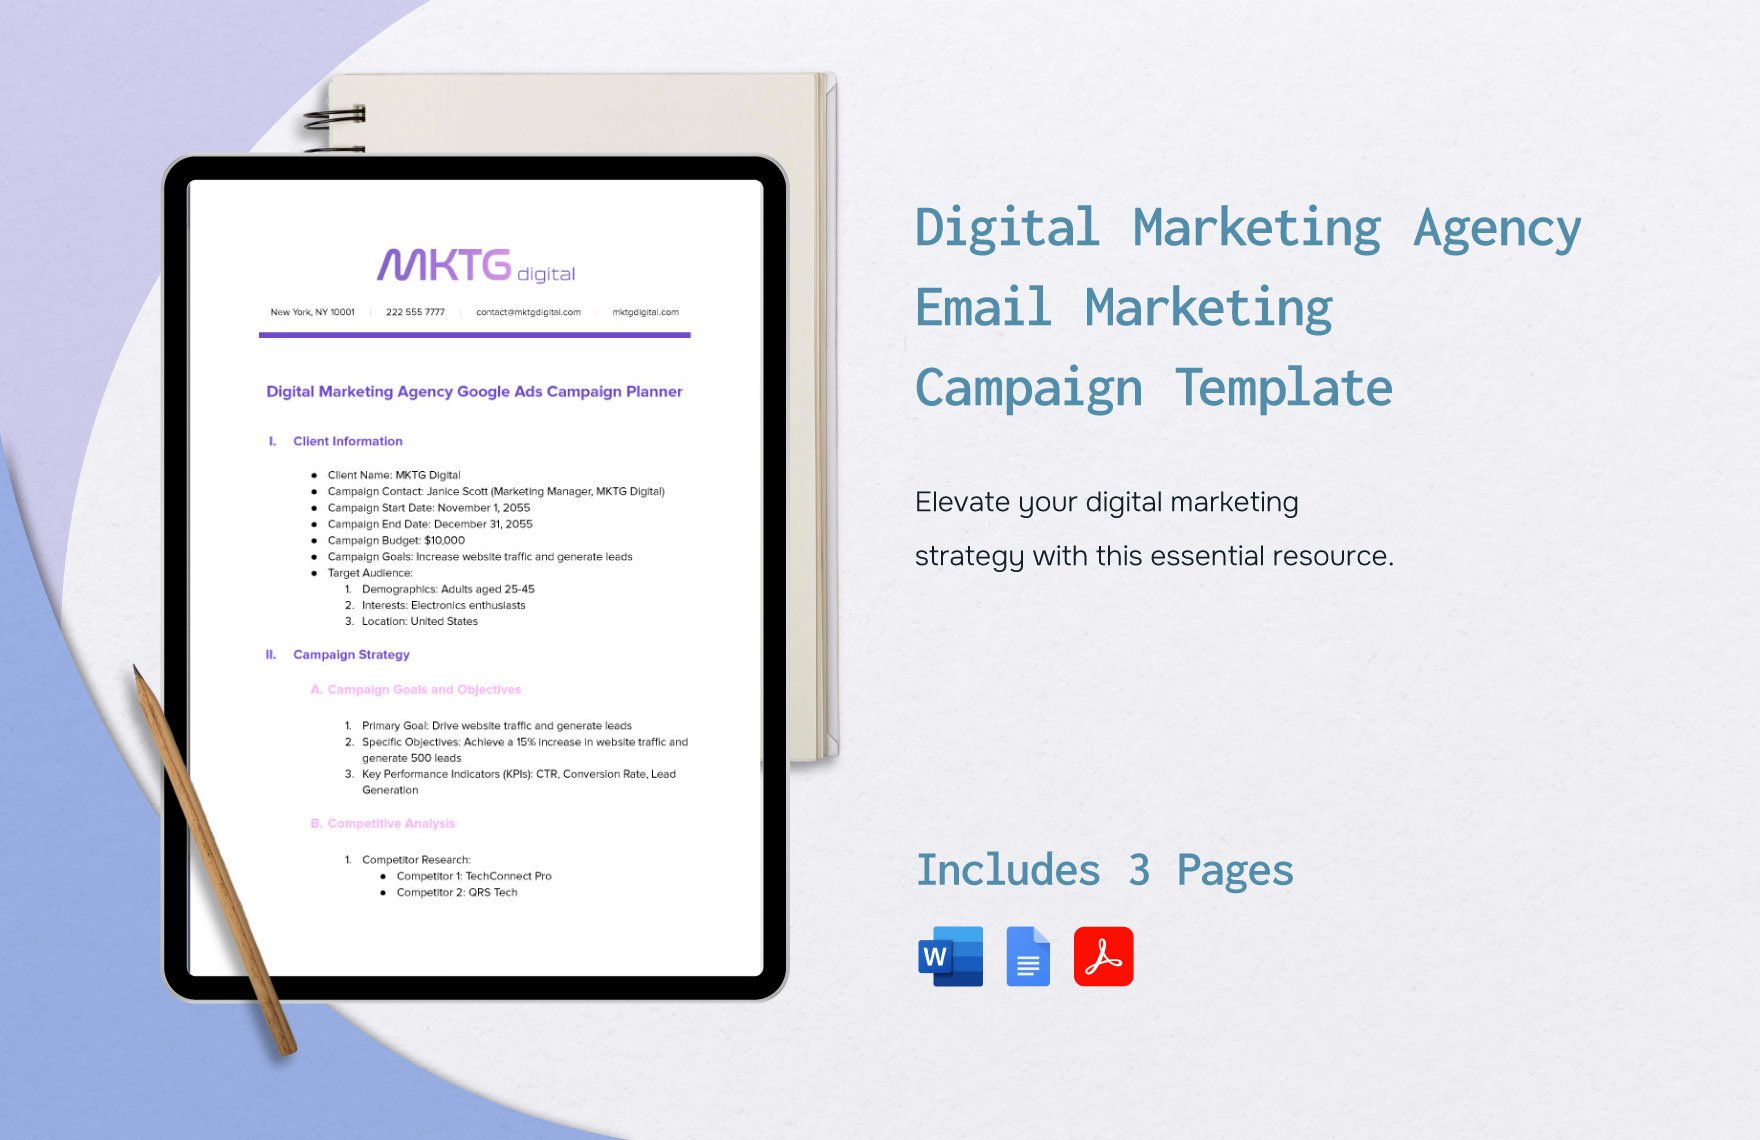 Digital Marketing Agency Email Marketing Campaign Template